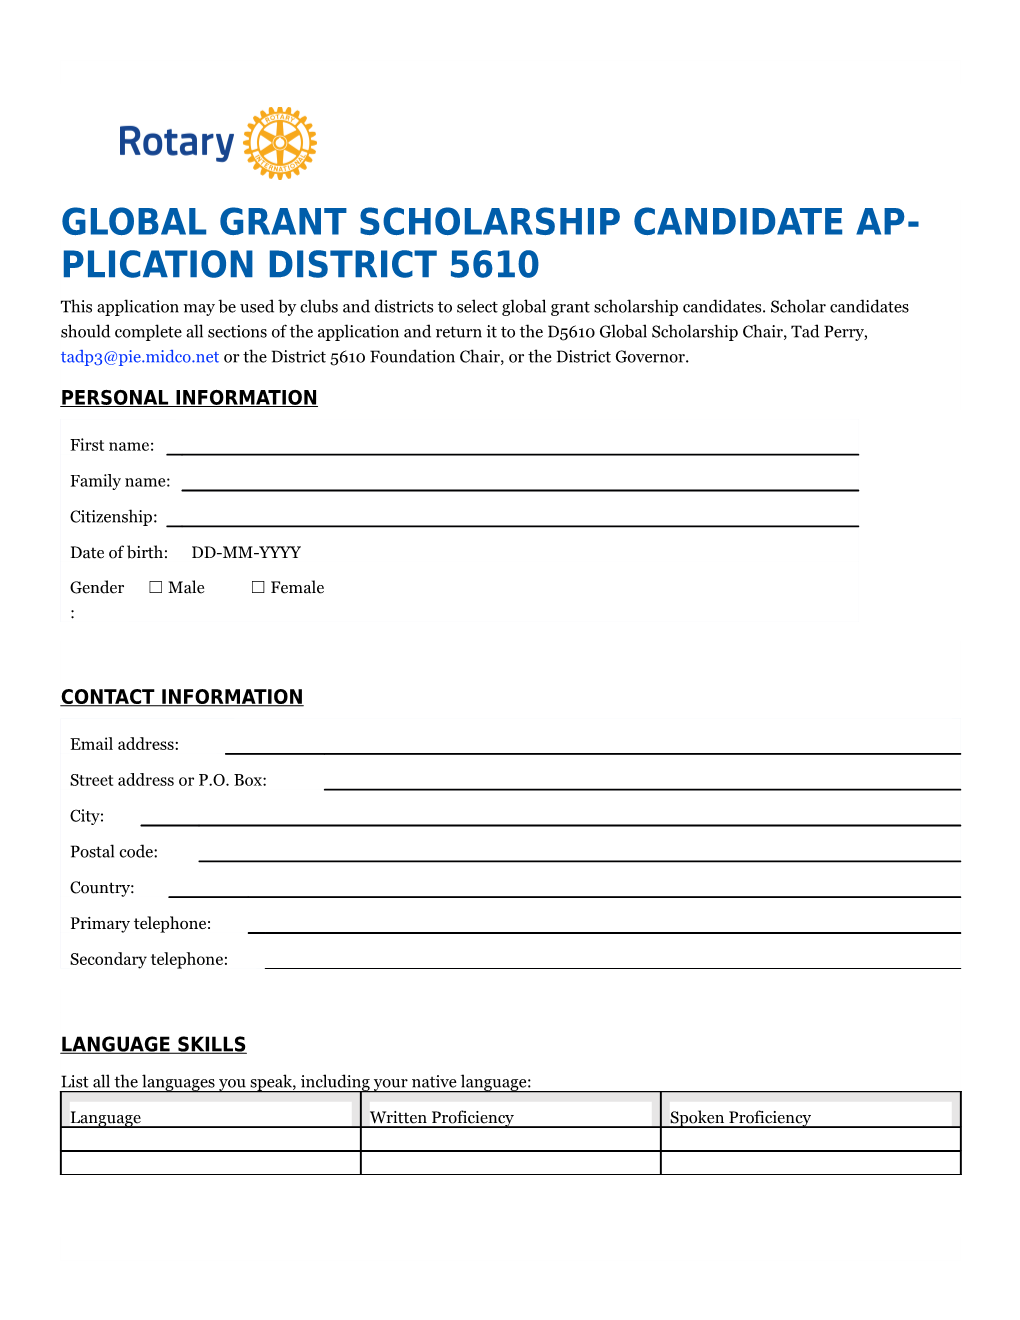 Global Grant Scholarship CANDIDATE Application District 5610